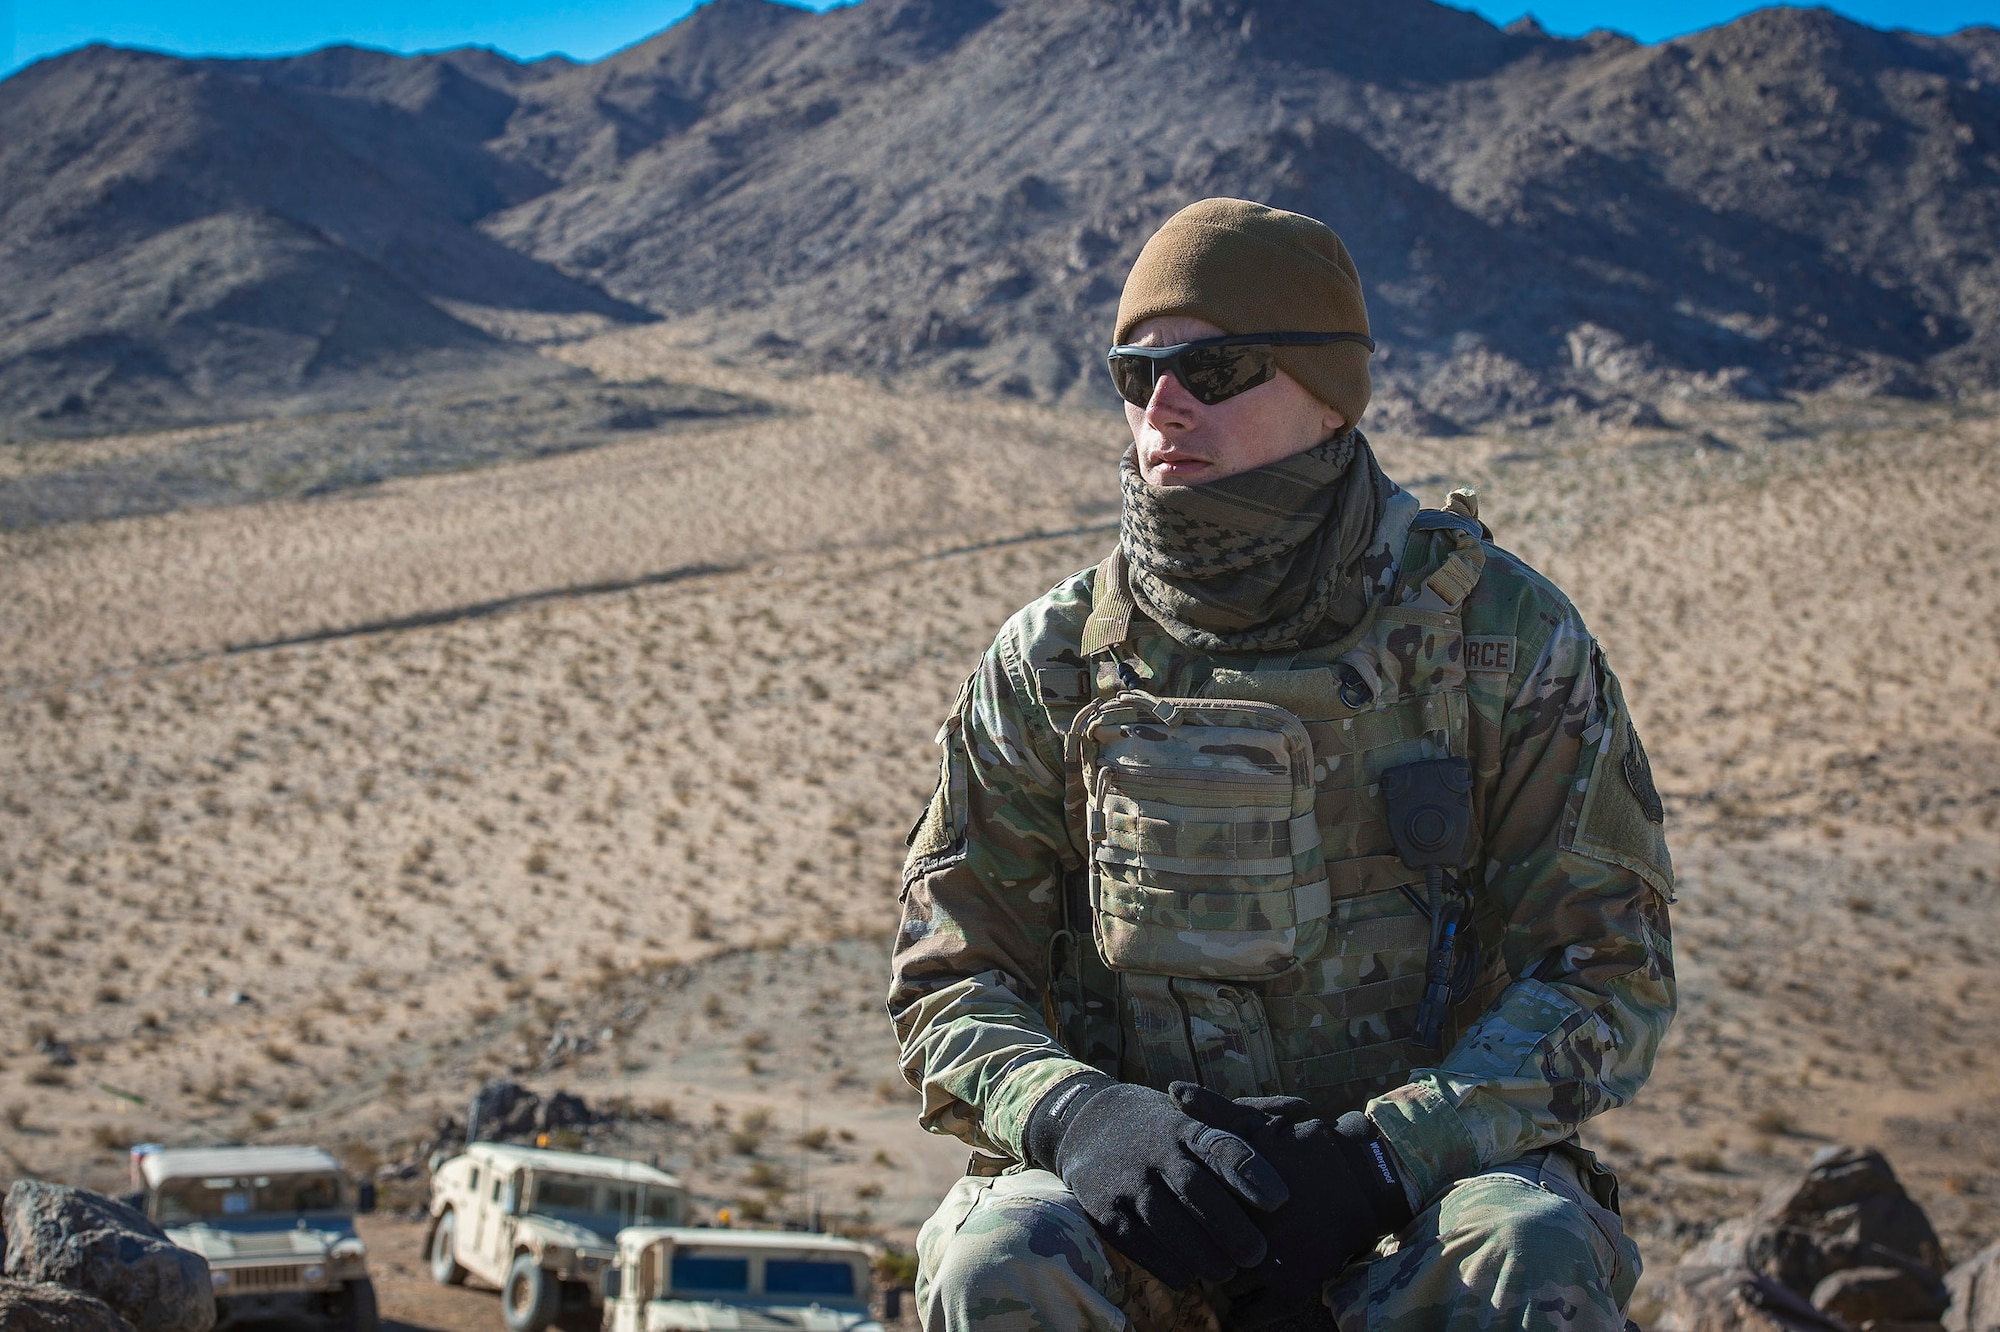 Senior Airman Dylan Olson, 11th Air Support Operations Squadron radio maintainer, embraces the cold in the Mojave Desert before helping guide F-16 Fighting Falcons through close-air support training at Ft. Irwin, Calif., during a National Training Center pre-deployment rotation, Feb. 20, 2018. Using Army support weather forecasters specialized meteorology skills, Air Force Tactical Air Control Parties helped maneuver aircraft through harsh winds in a safe manner. (U.S. Air Force photo by Senior Airman Greg Nash)